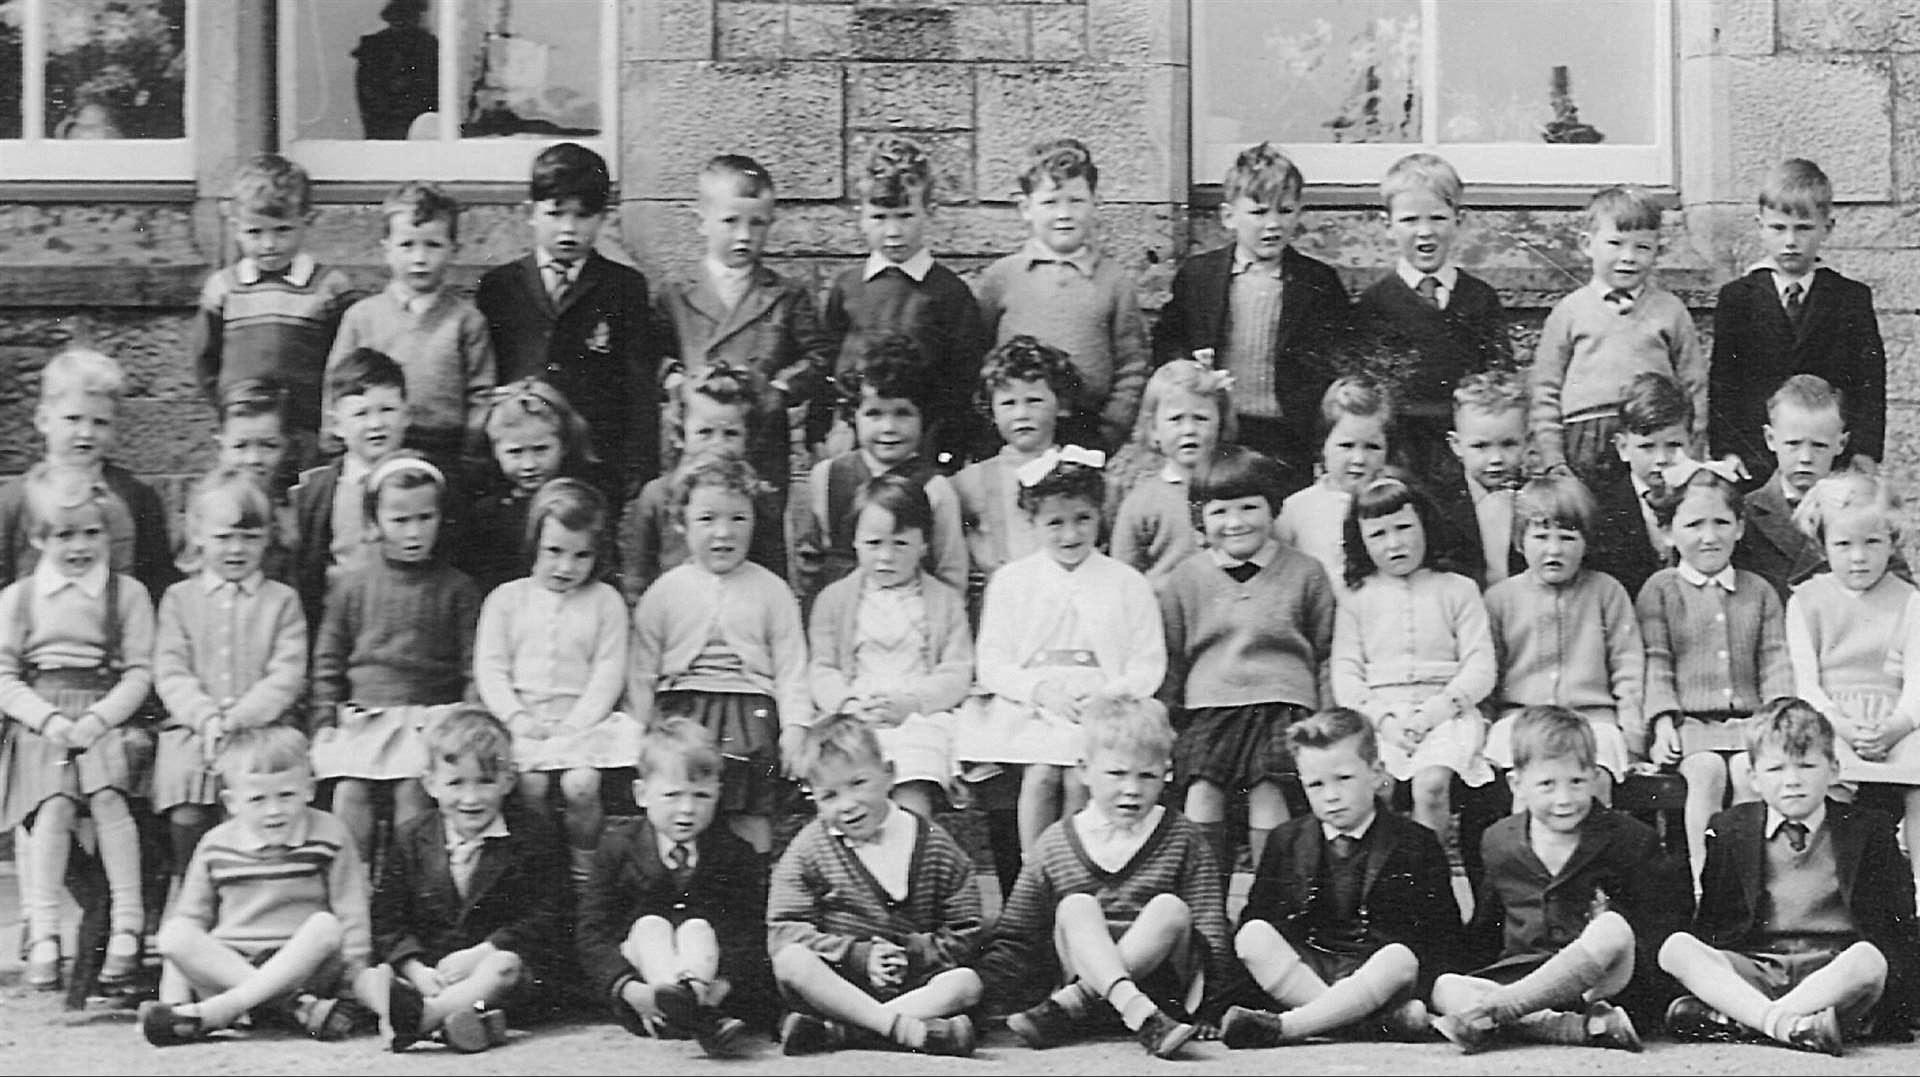 Classmates posing for the camera at Miller Academy in Thurso. The photo is thought to have been taken in 1962.